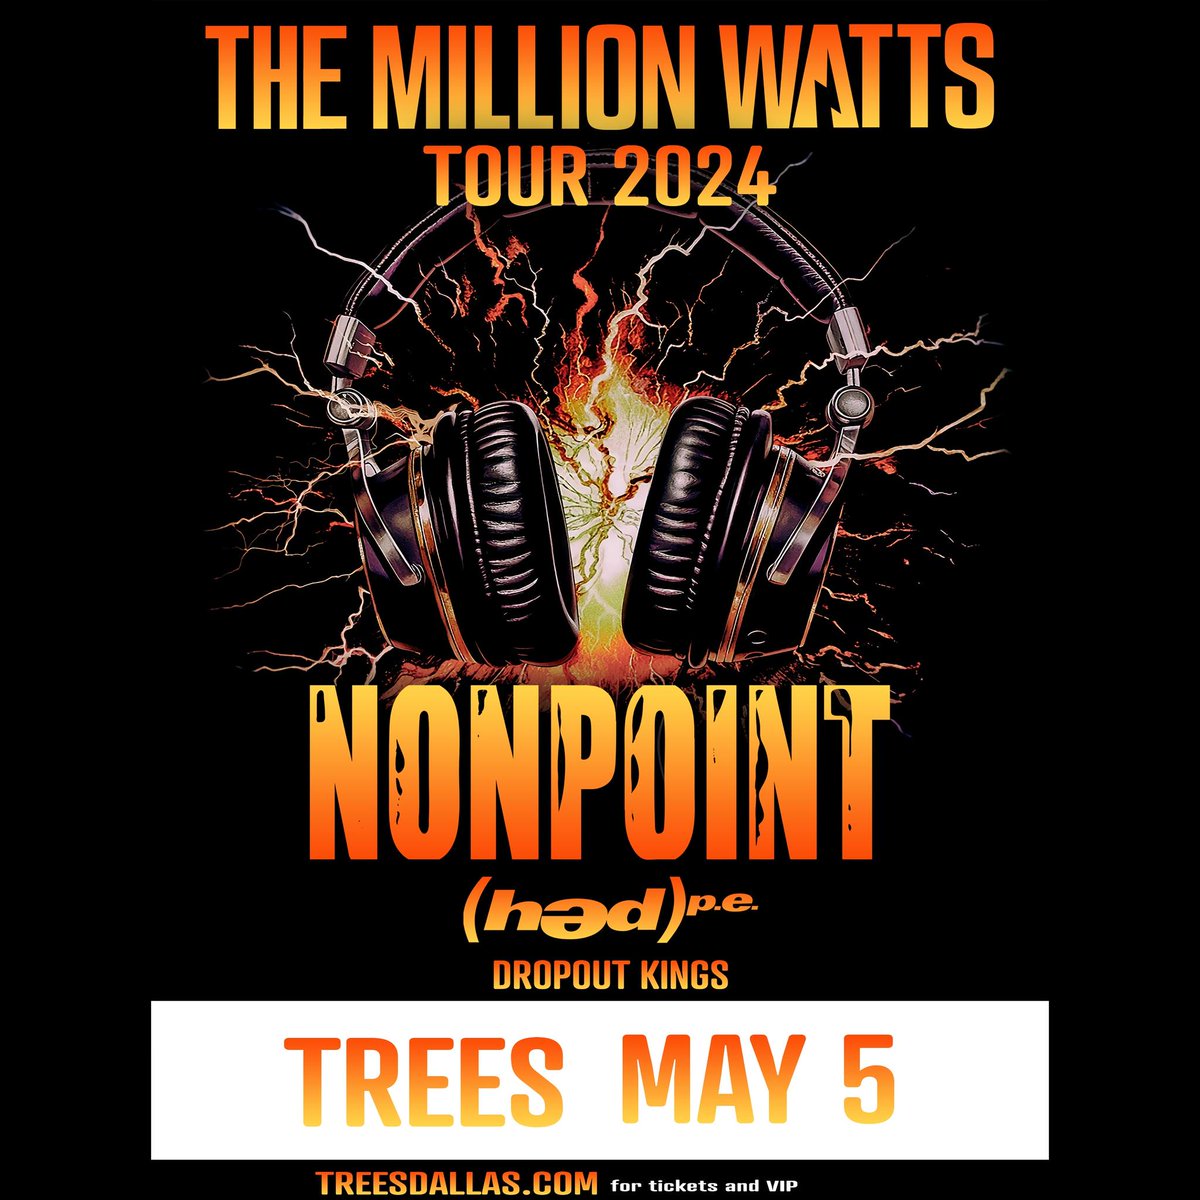 Don't miss! Nonpoint with special guests HED PE, and Dropout Kings on May 5th. Get tickets this Friday 10am, at TreesDallas.com @nonpointband @therealhedpe @dropoutkingsaz